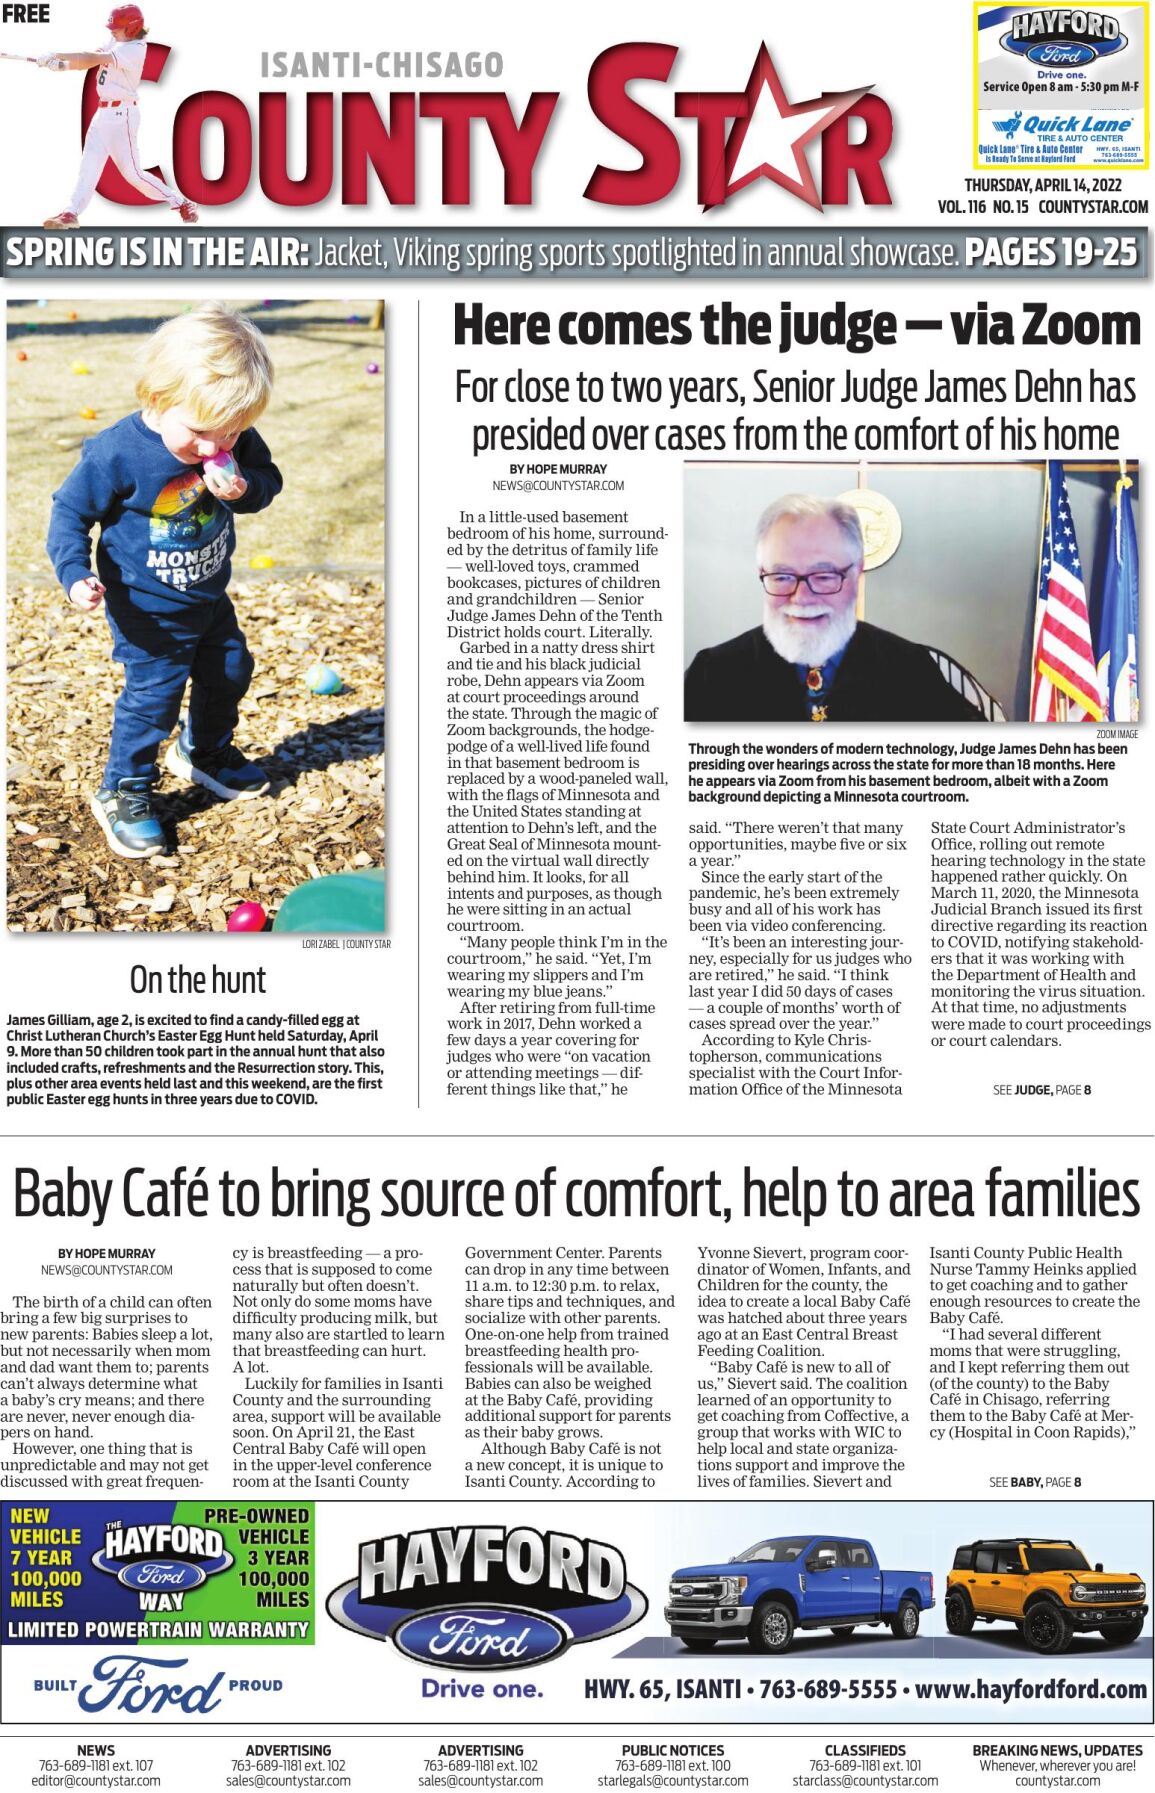 Isanti-Chisago County Star April 14, 2022 e-edition